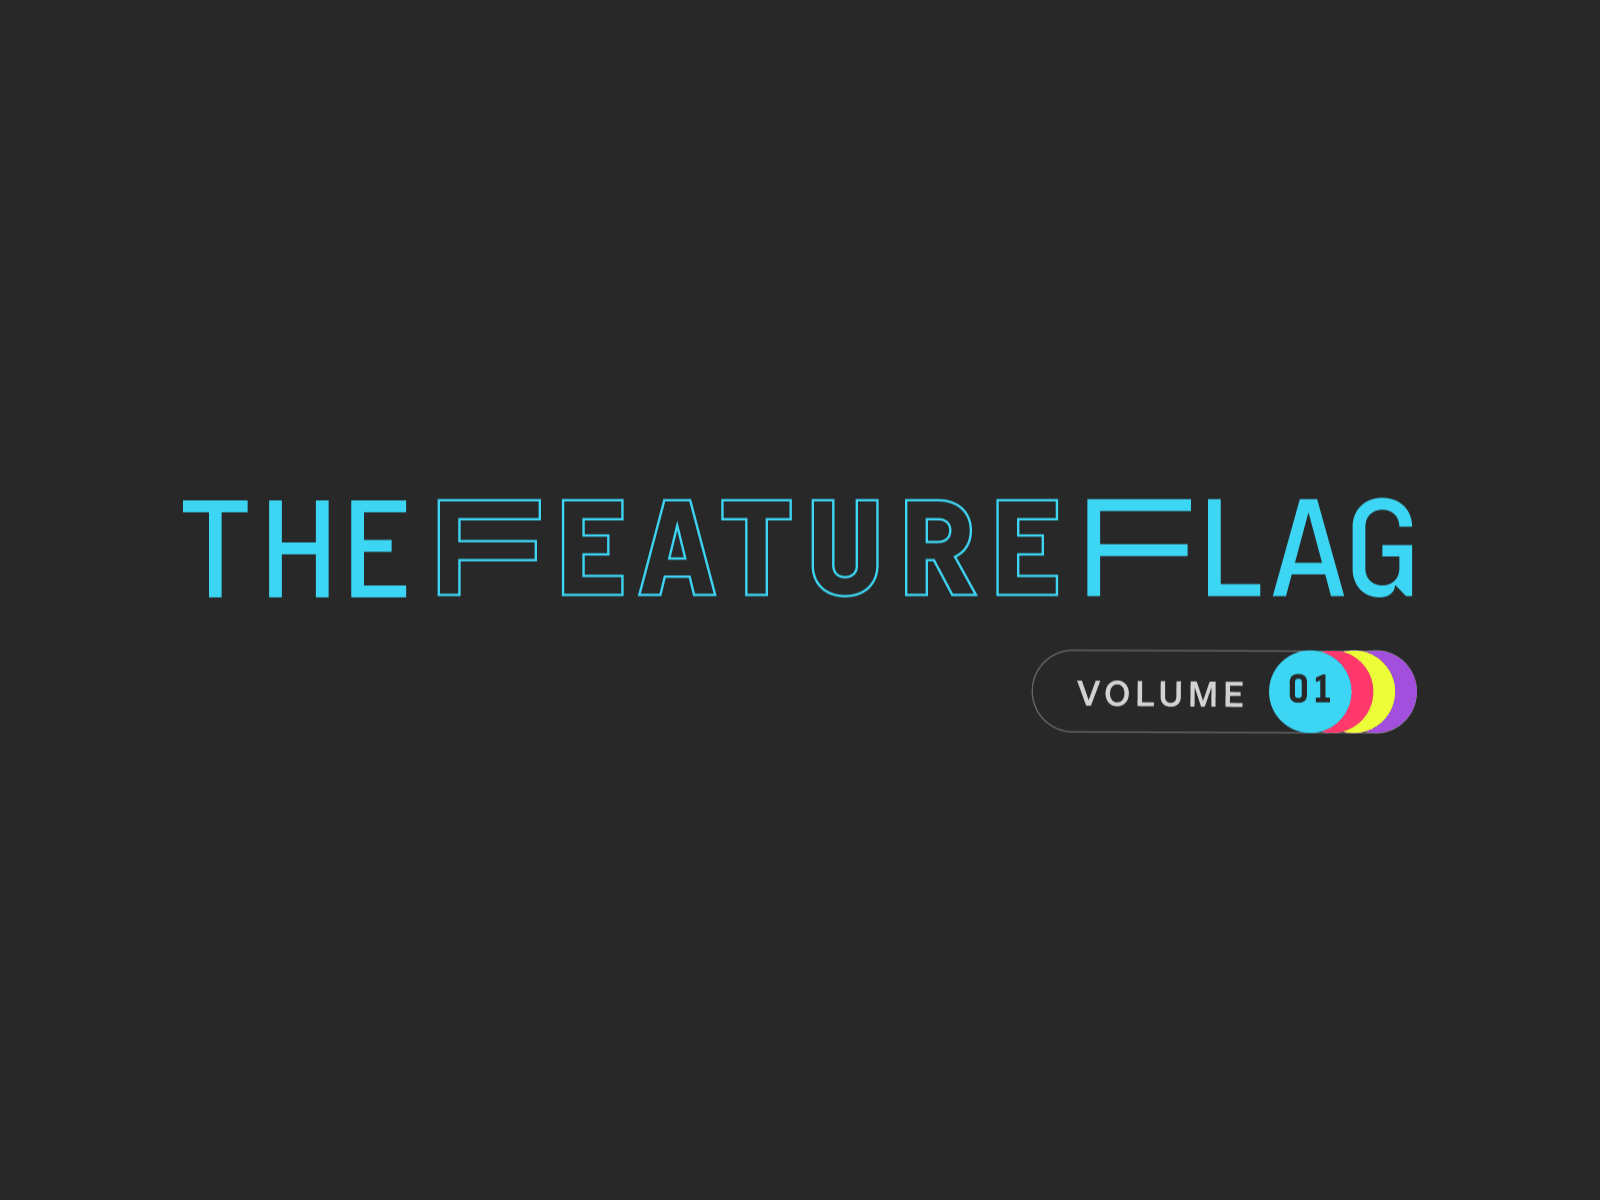 'The Feature Flag' quarterly newsletter